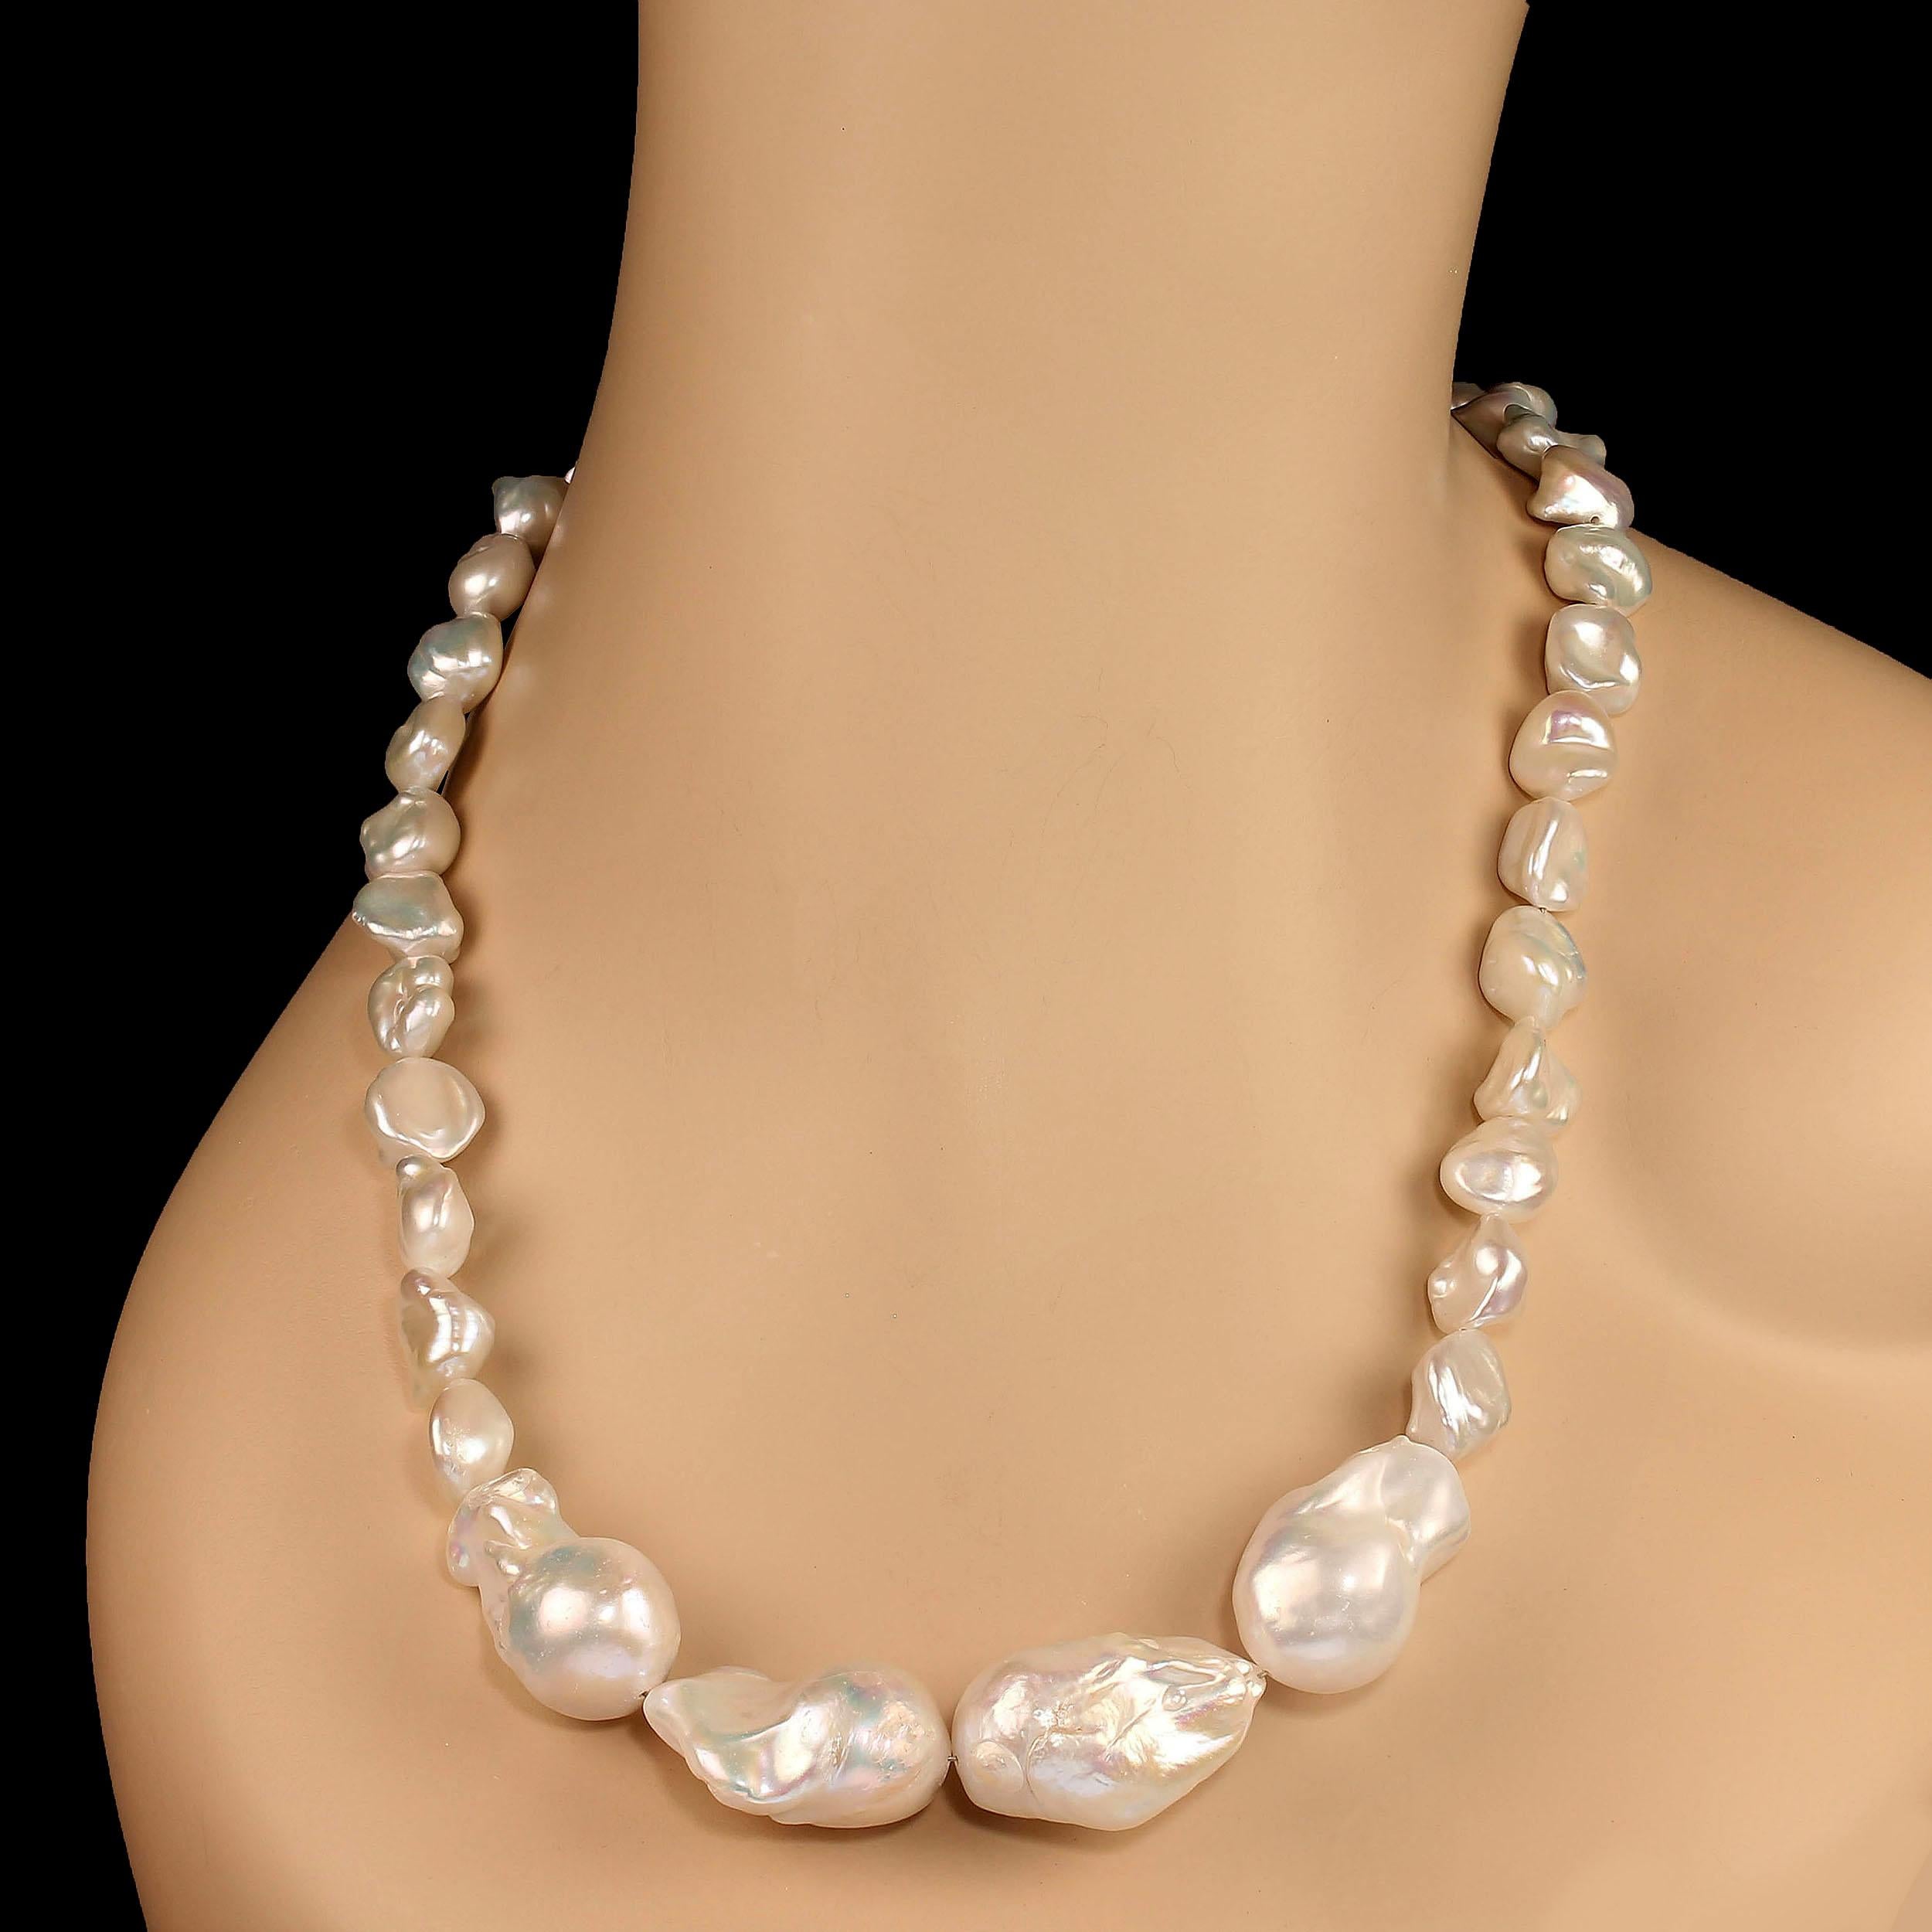 Artisan AJD 23 Inch White Pearl Statement necklace with Four Front Focal Pearls.  For Sale